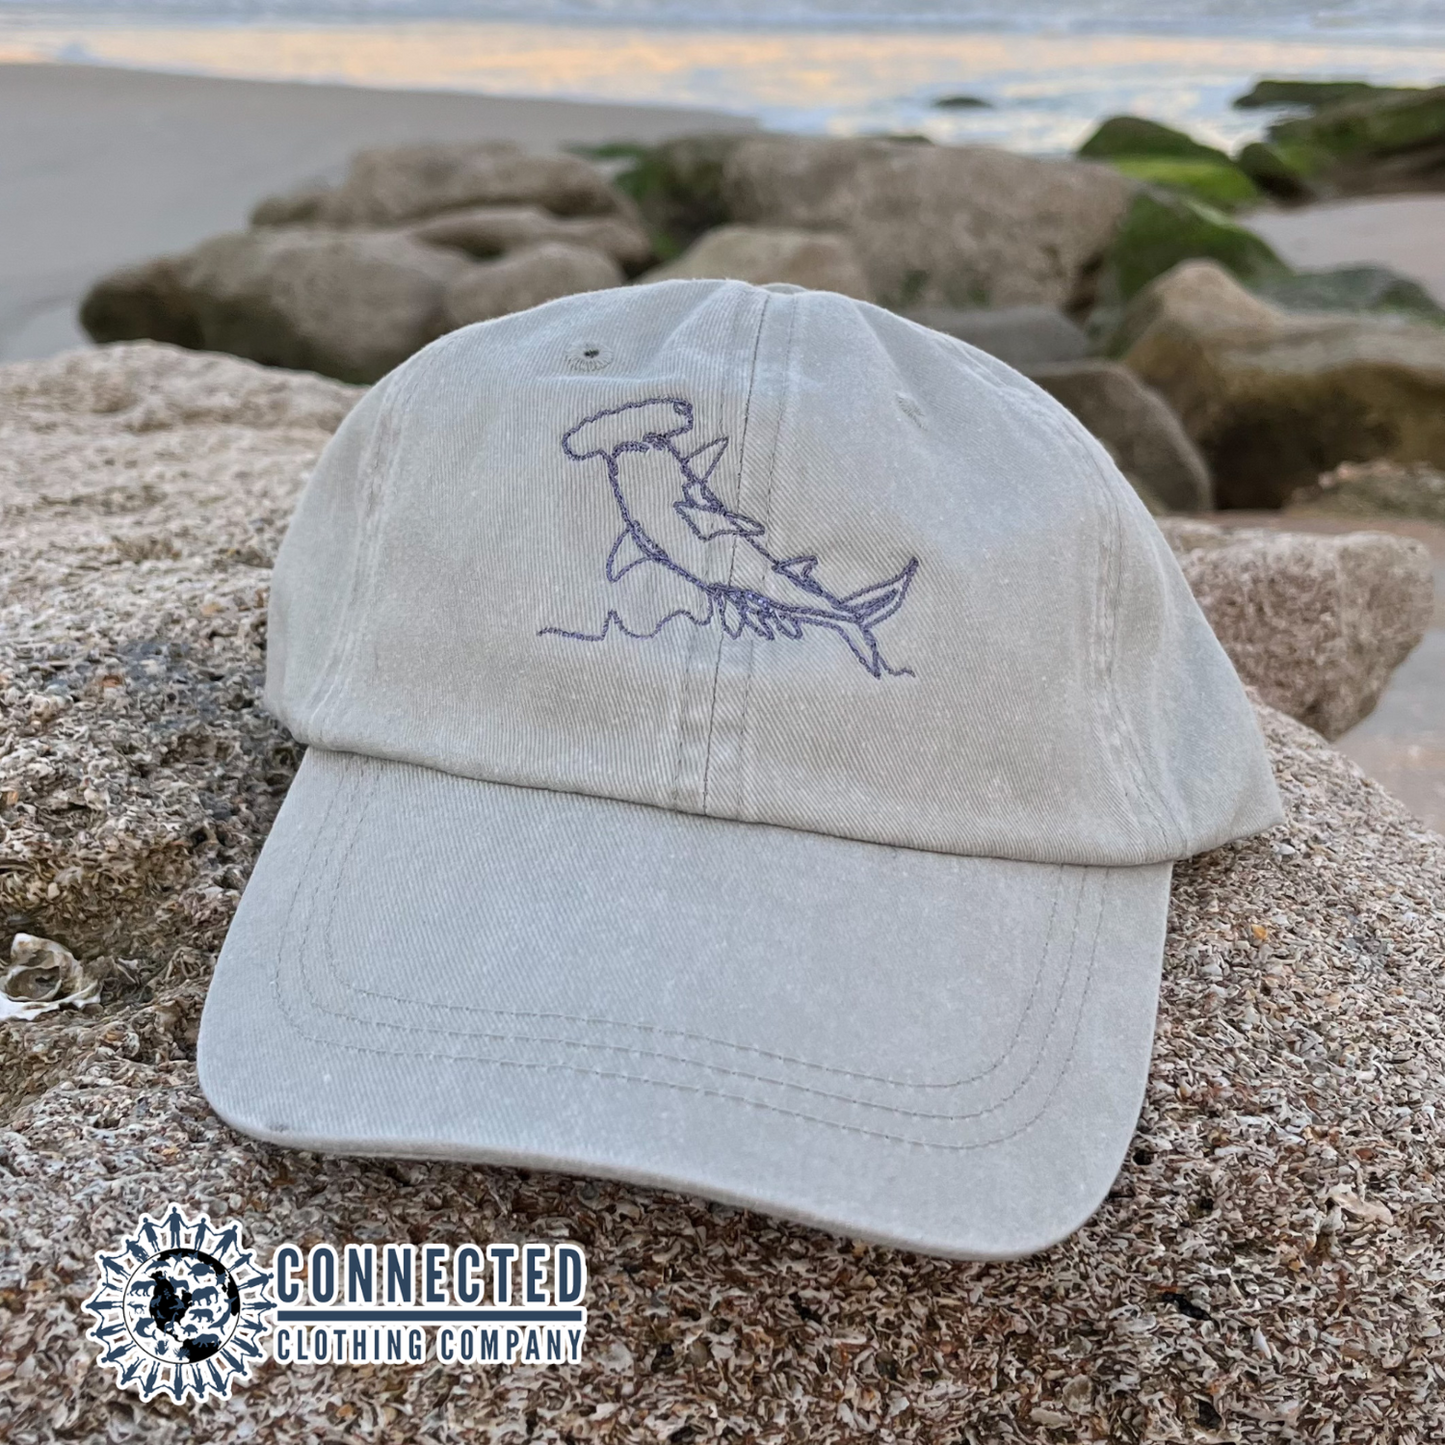 Hammerhead Shark Embroidered Hat - Connected Clothing Company - 10% of proceeds donated to ocean conservation